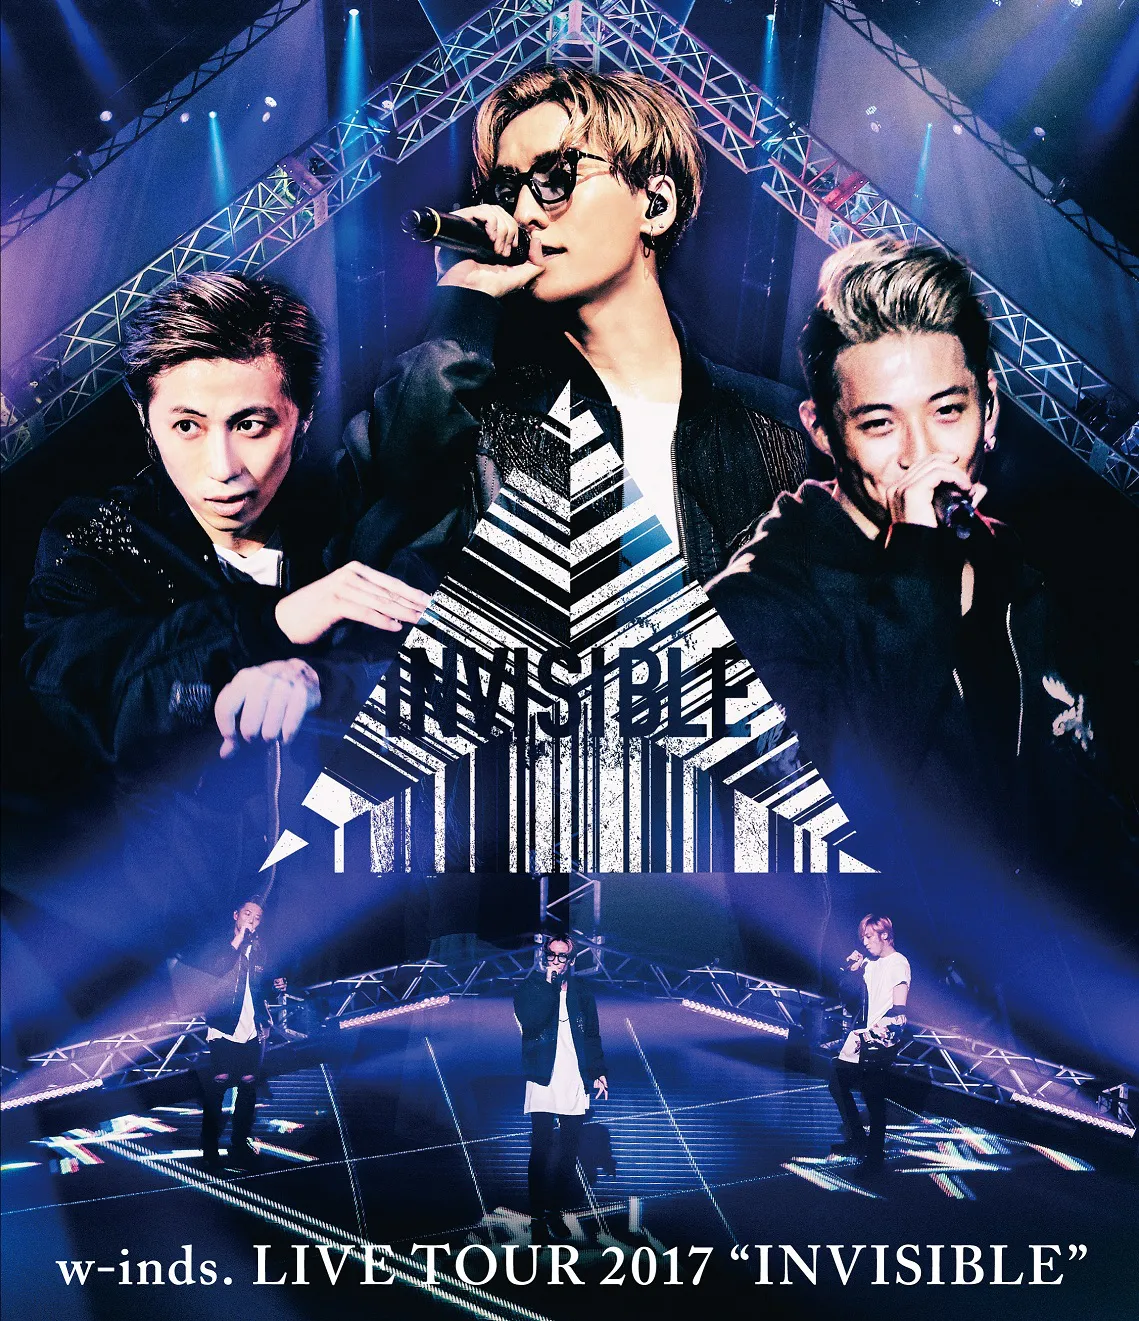 DVD / Blu-ray「w-inds. LIVE TOUR 2017 "INVISIBLE"」